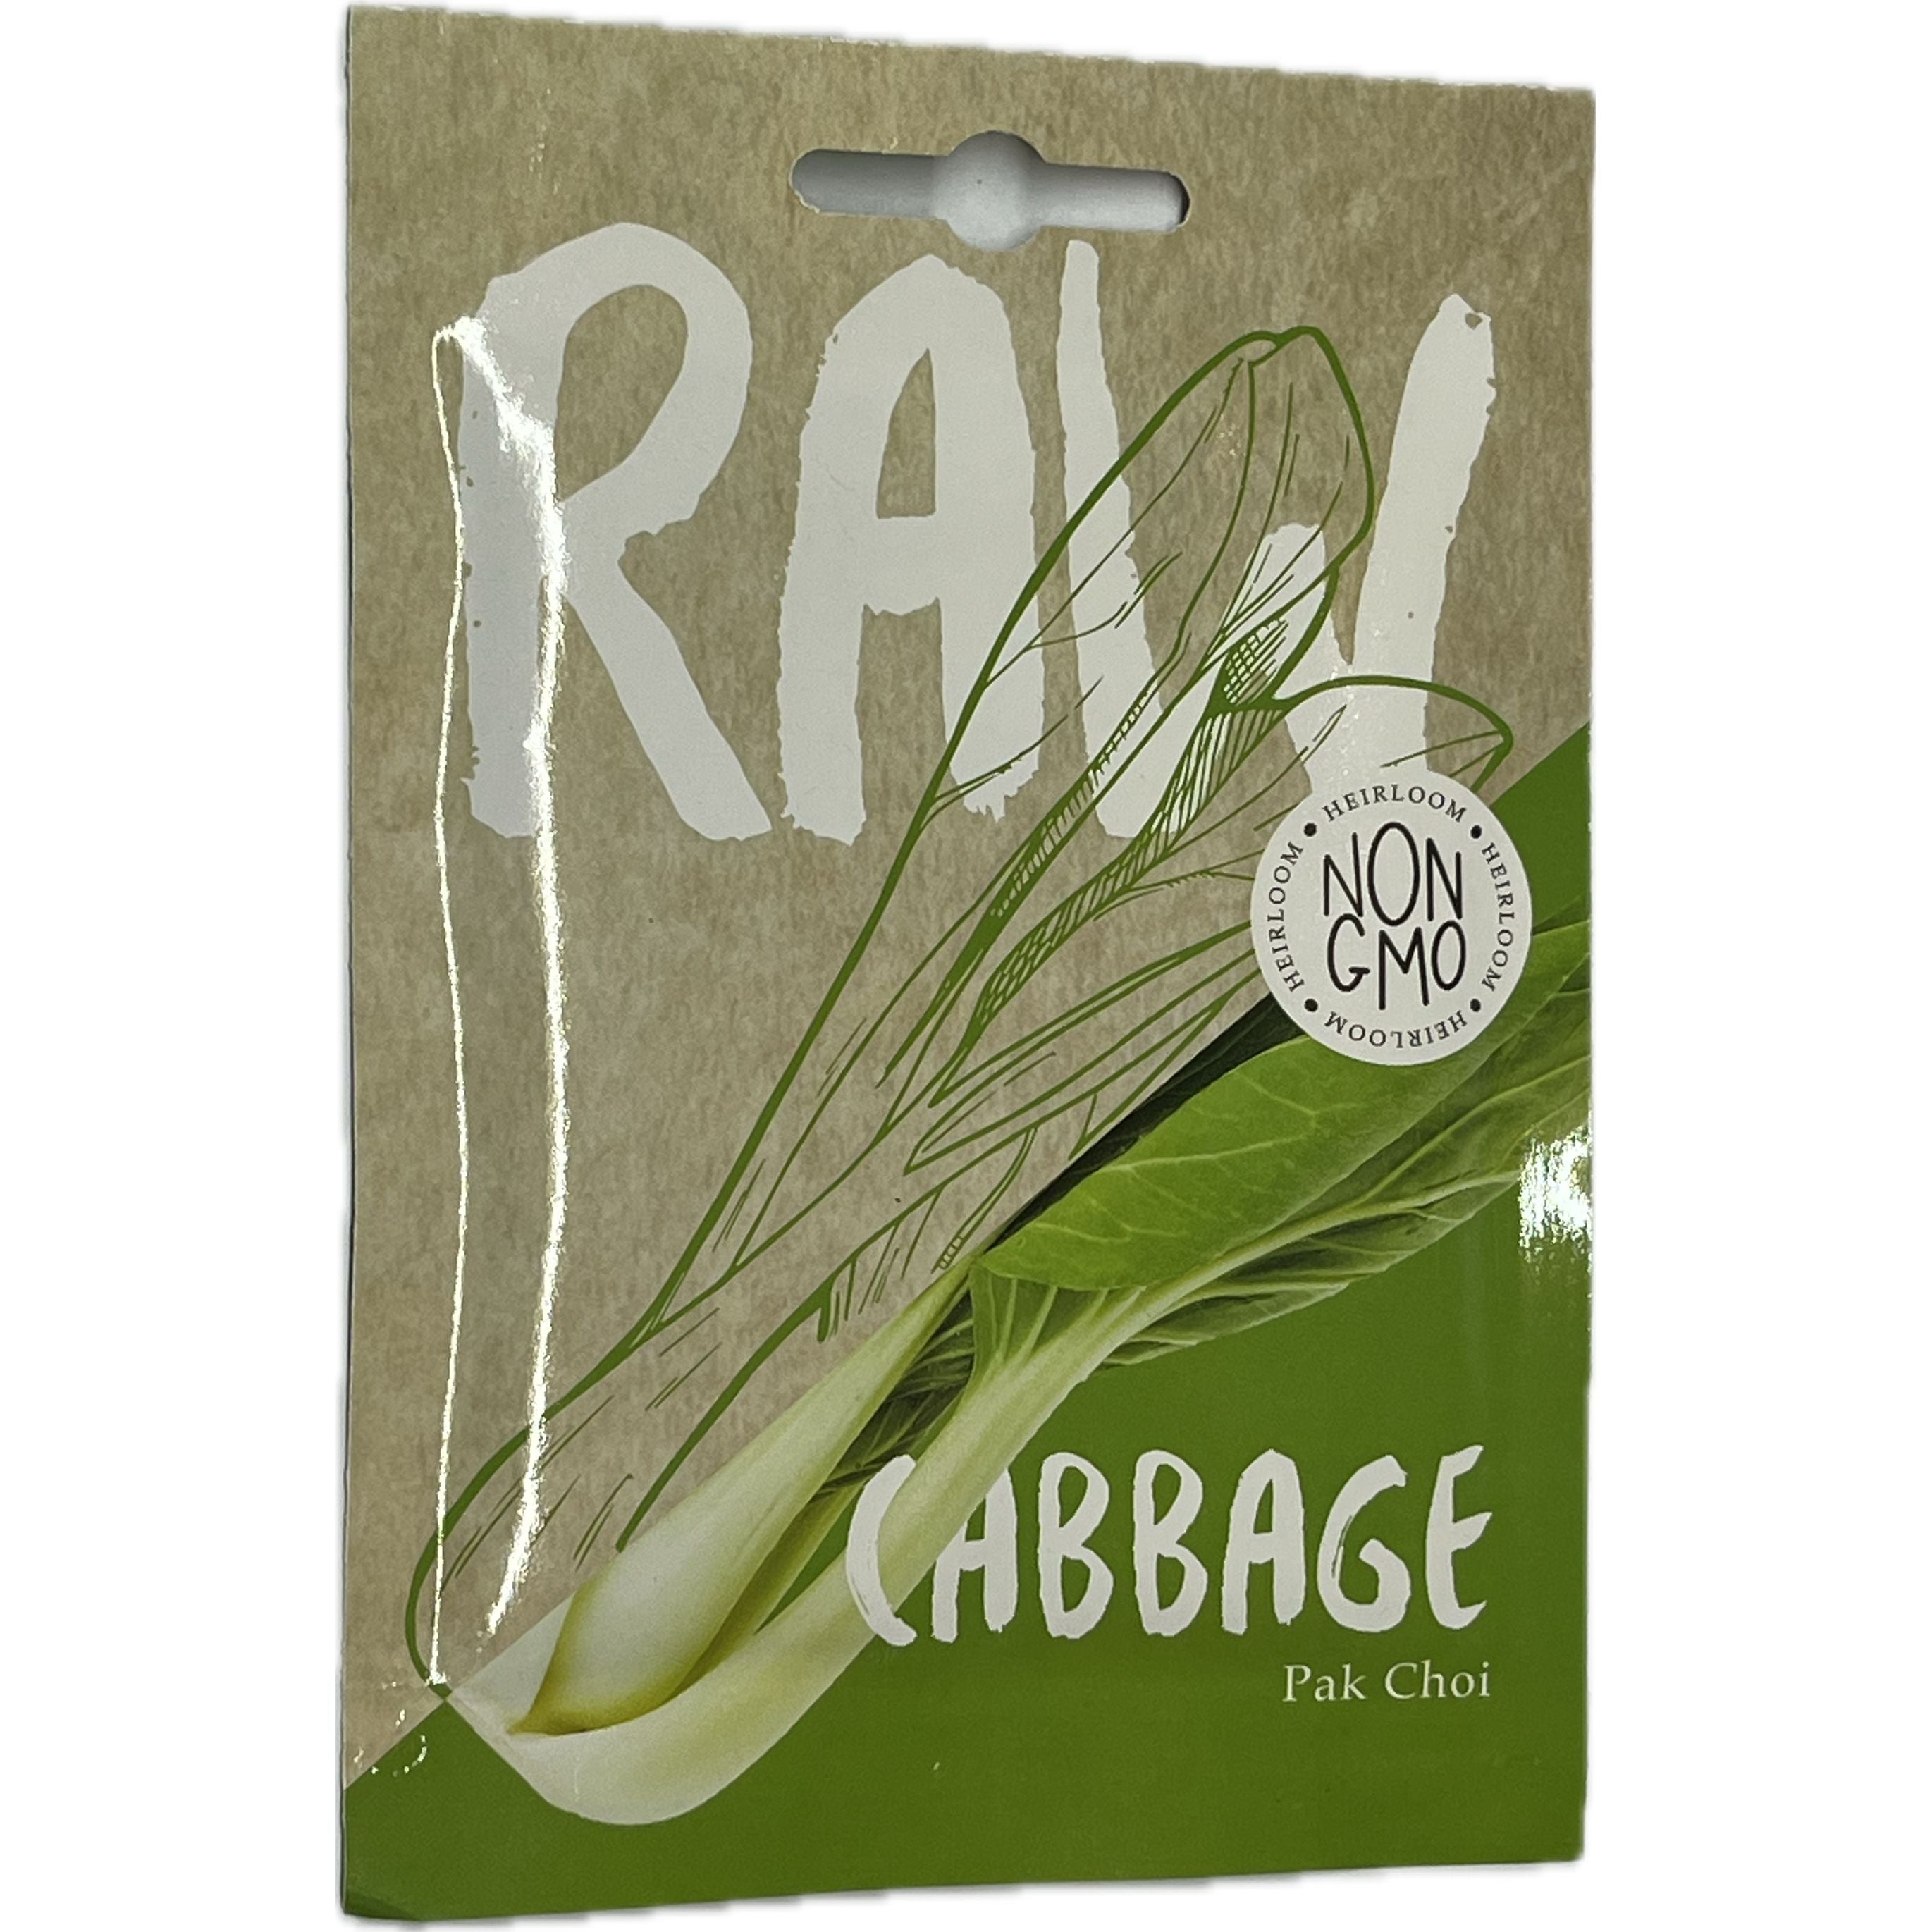 Vegetable Seed Cabbage's RAW